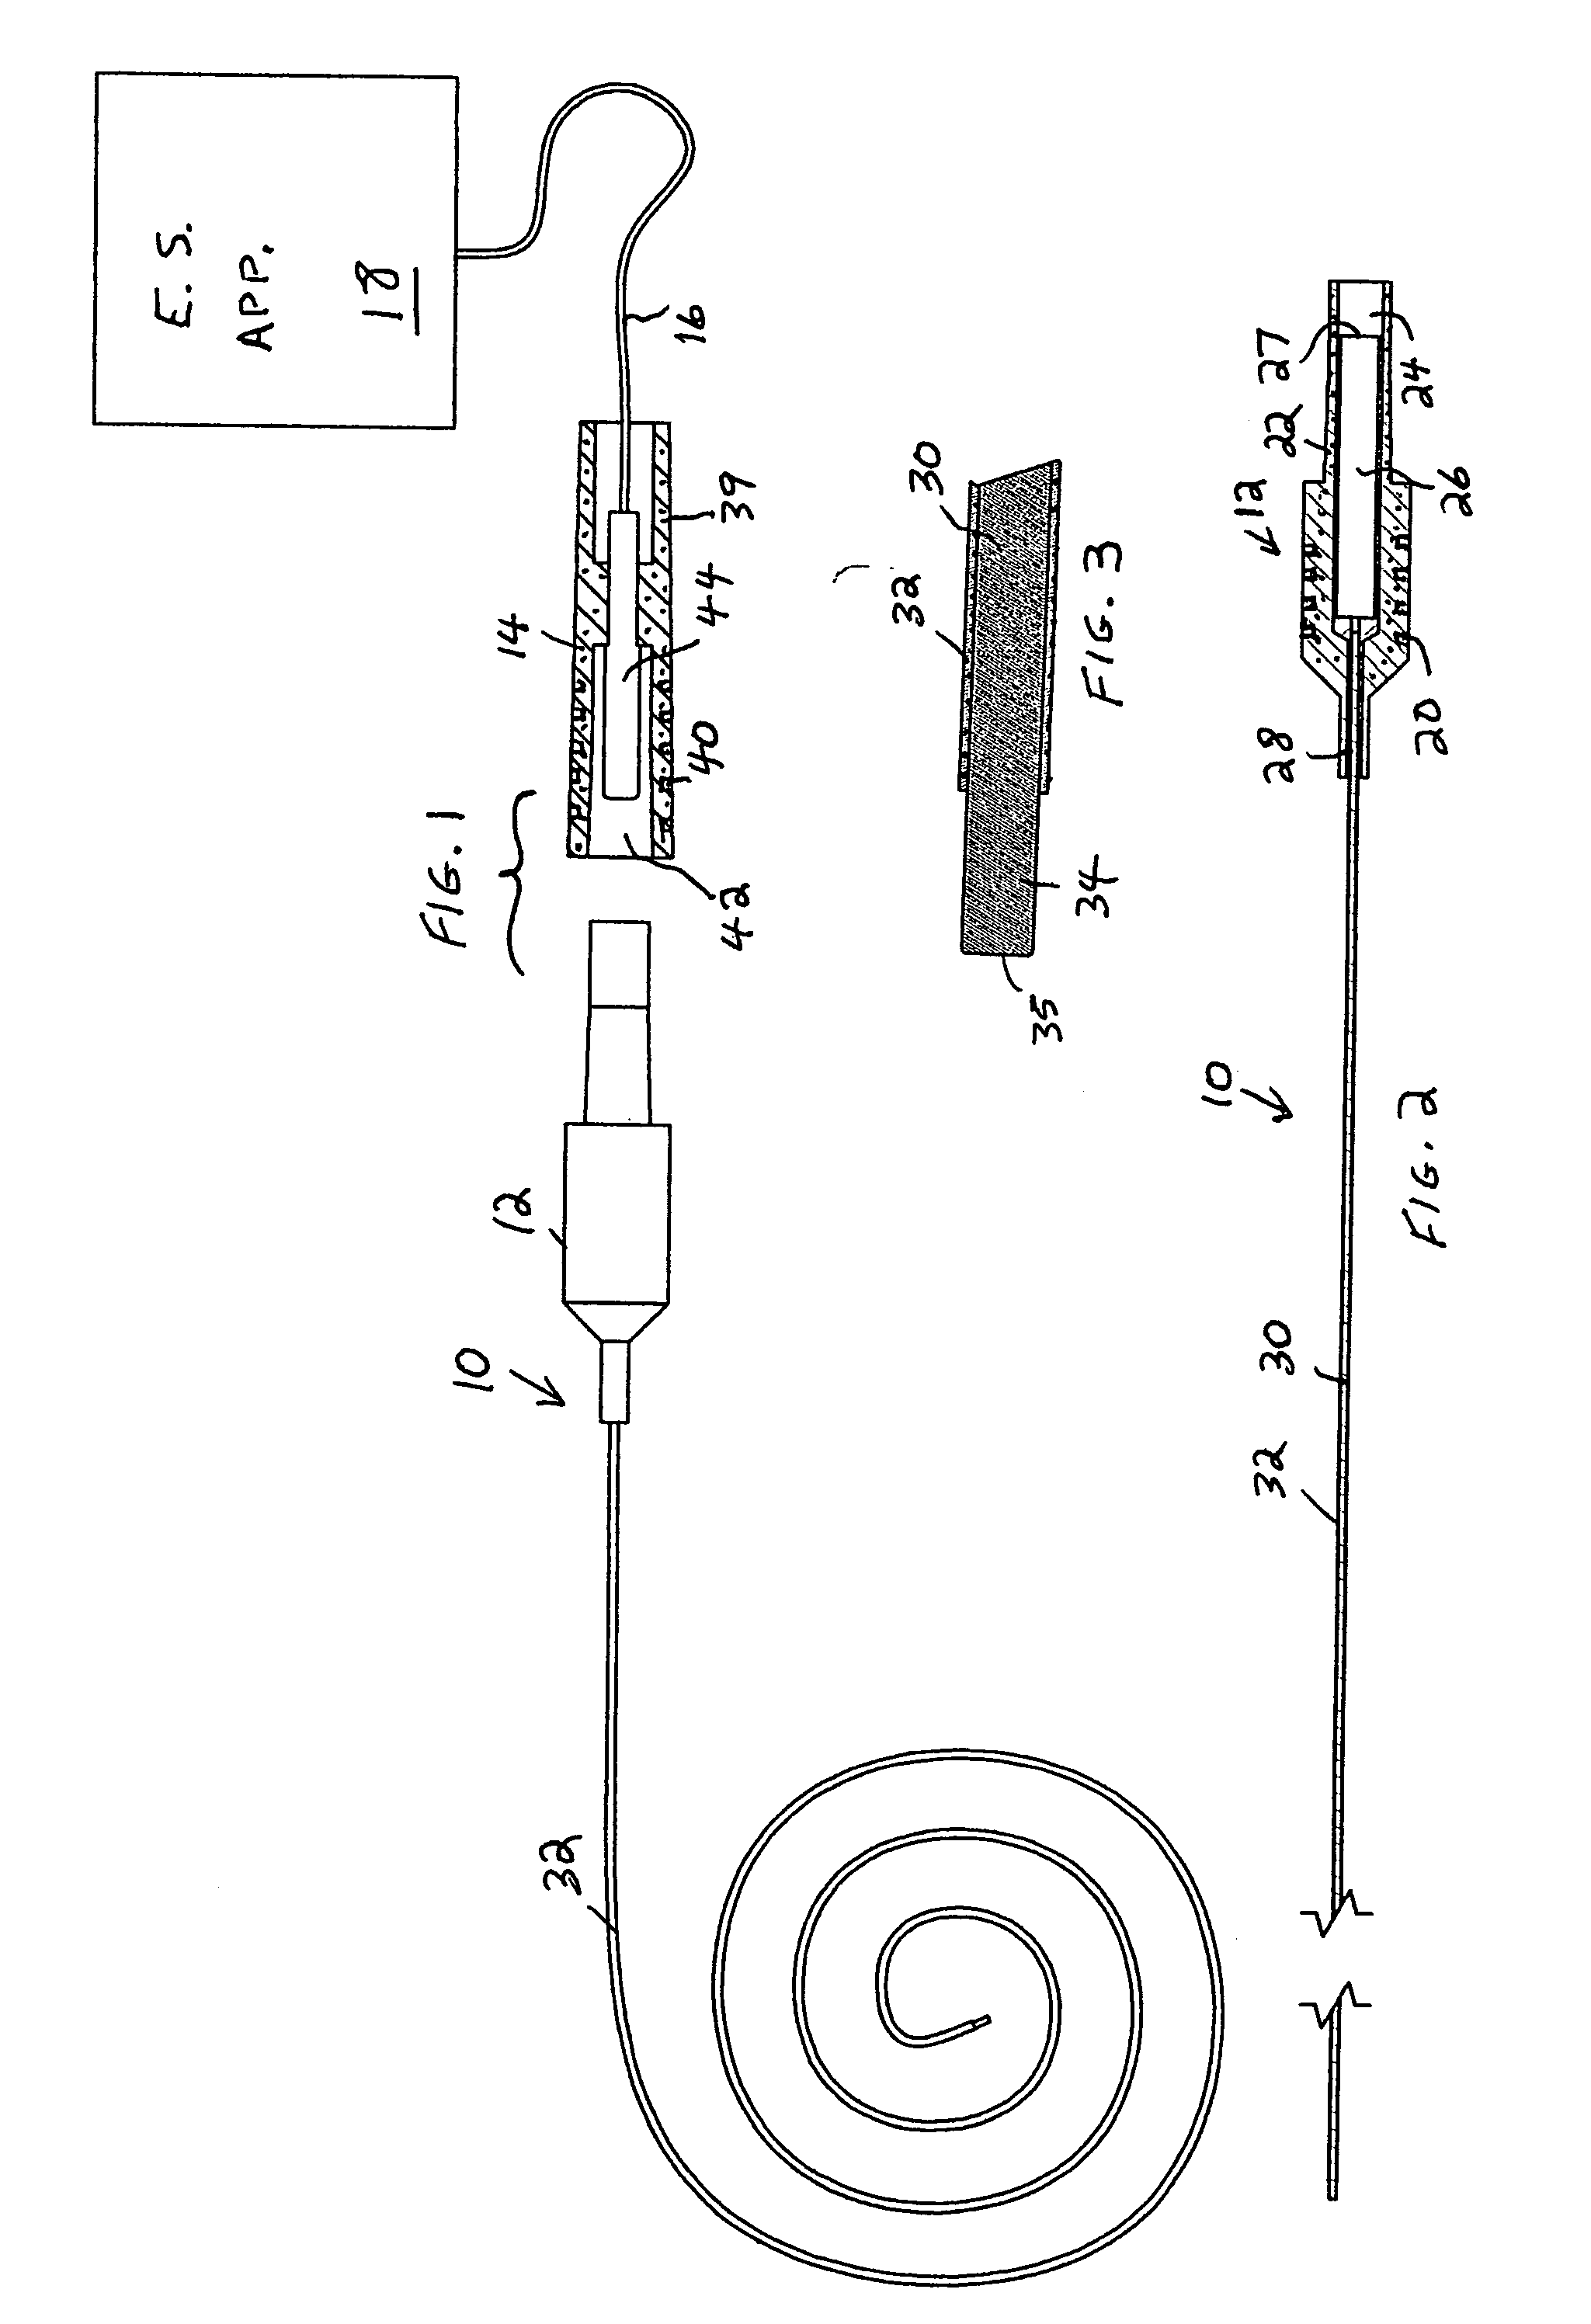 Flexible electrosurgical electrode for treating tissue